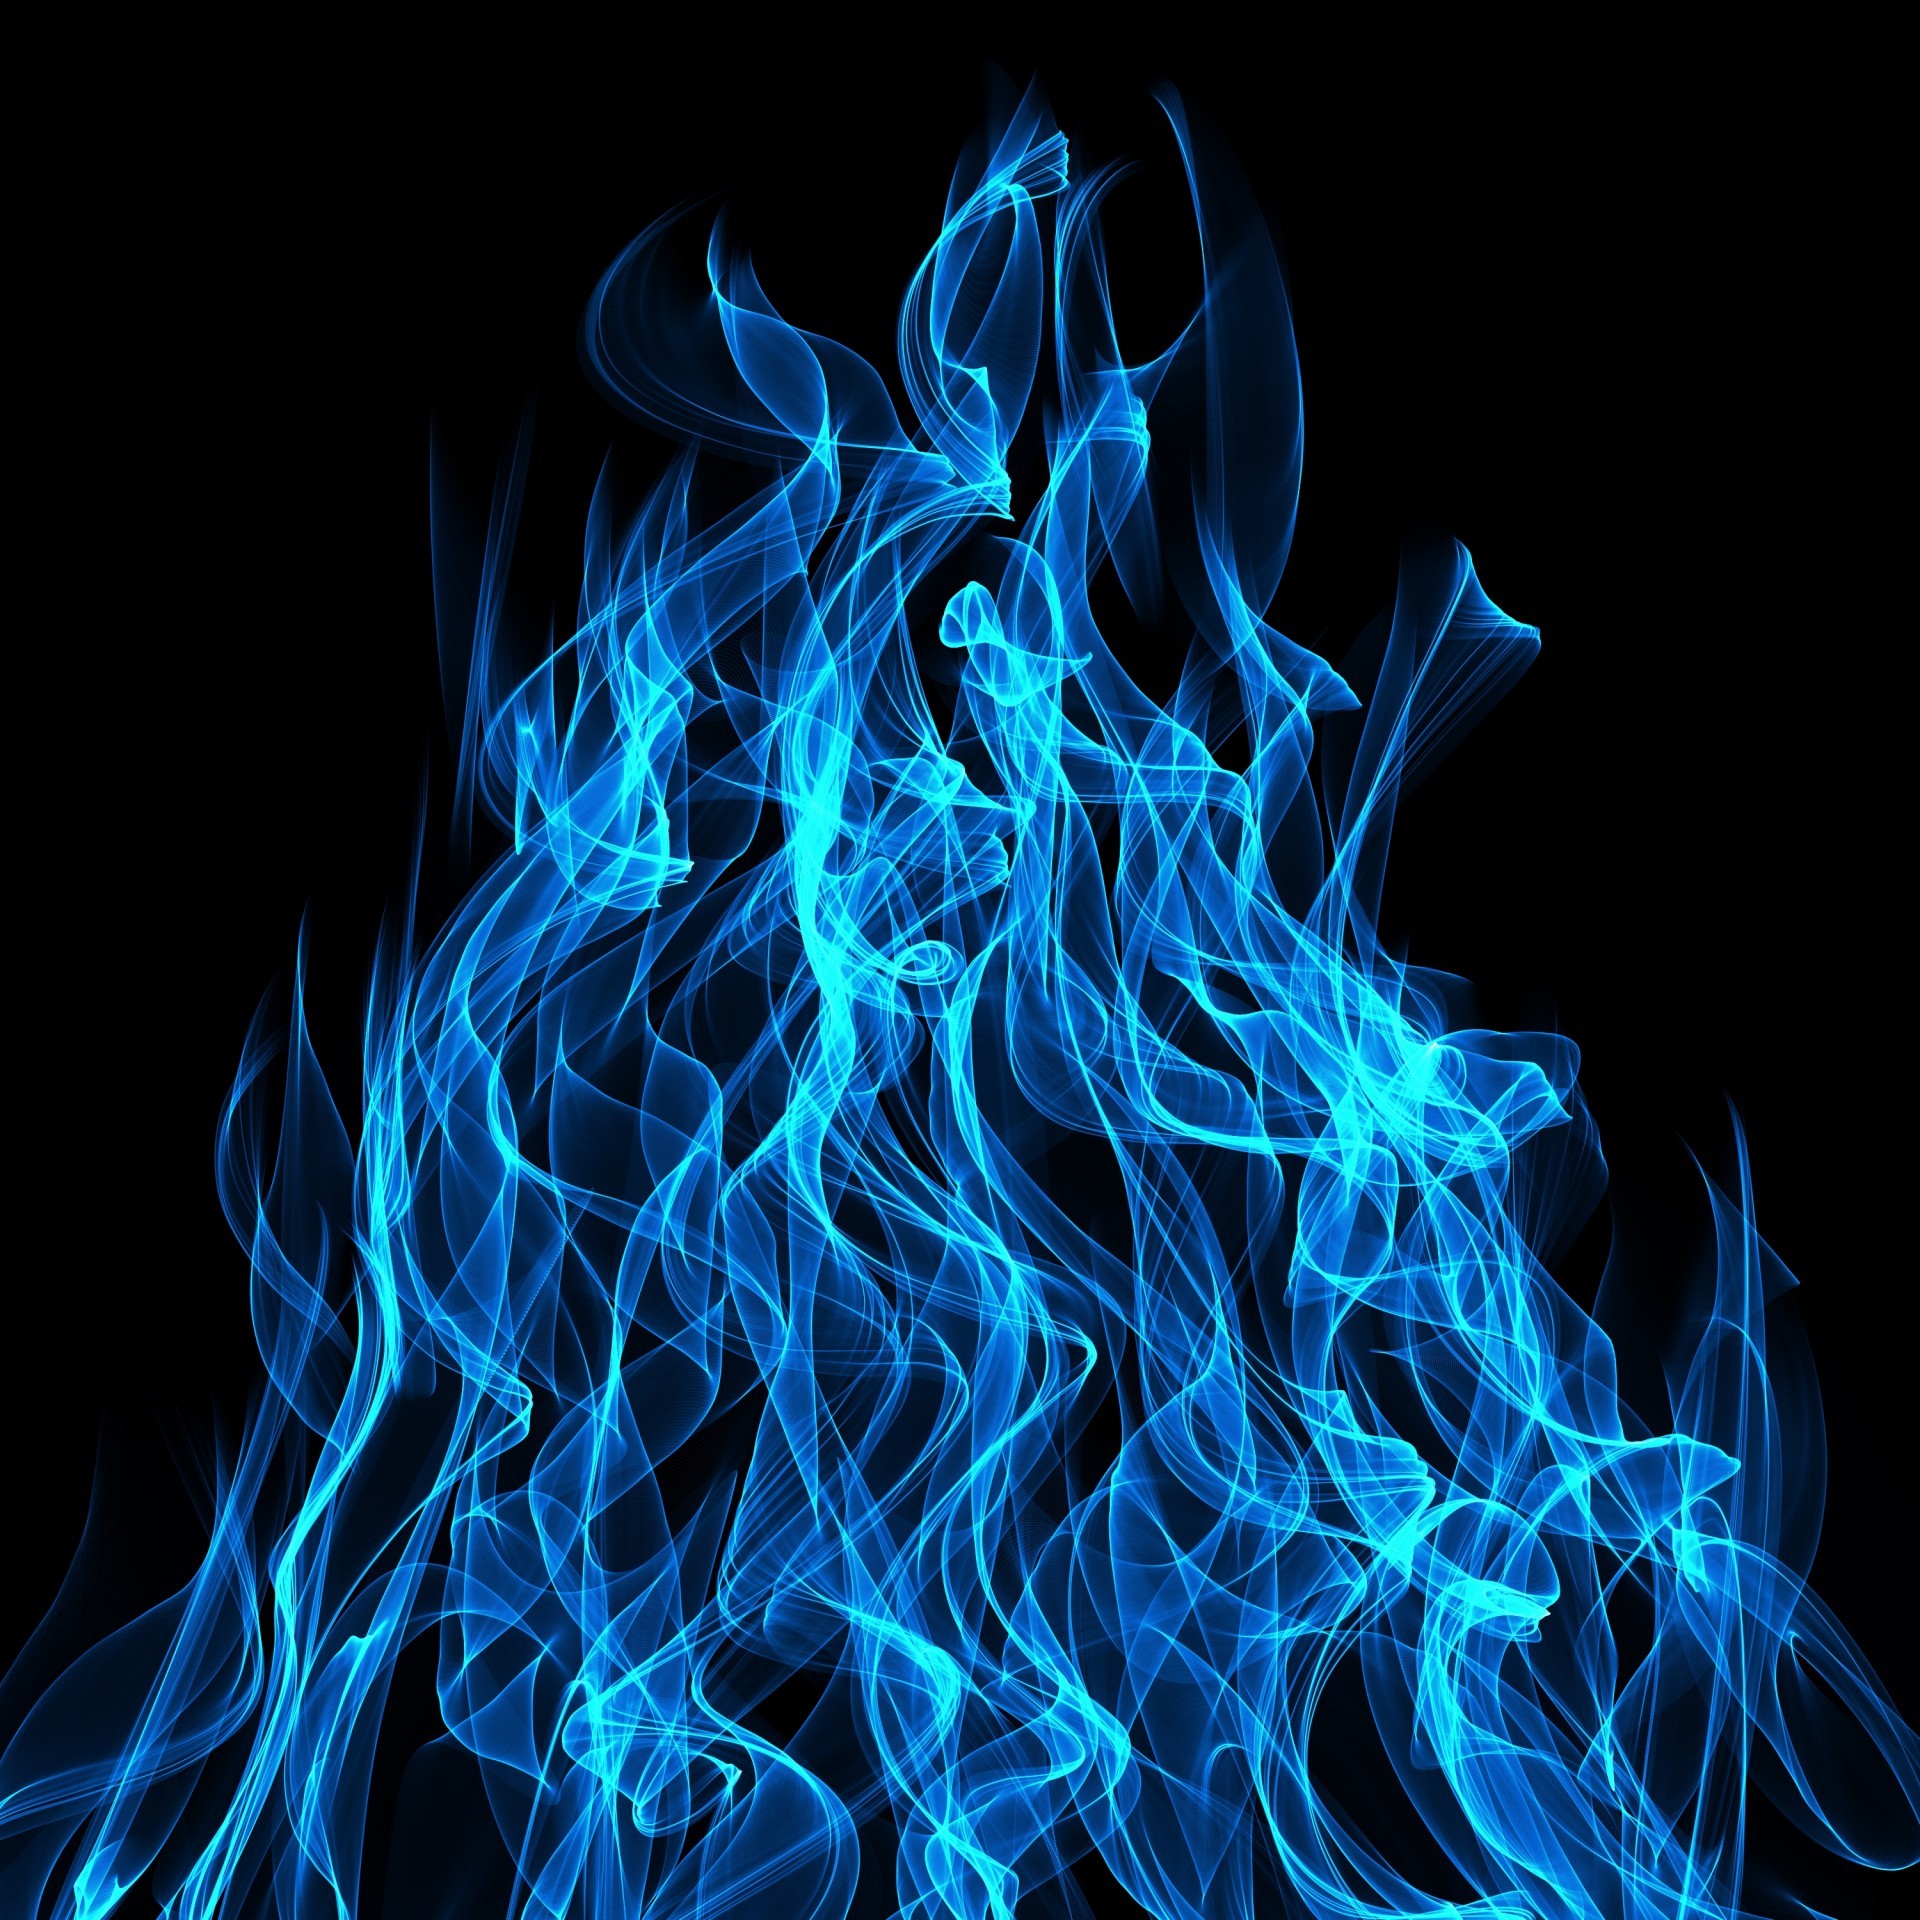  on blue flames wallpapers